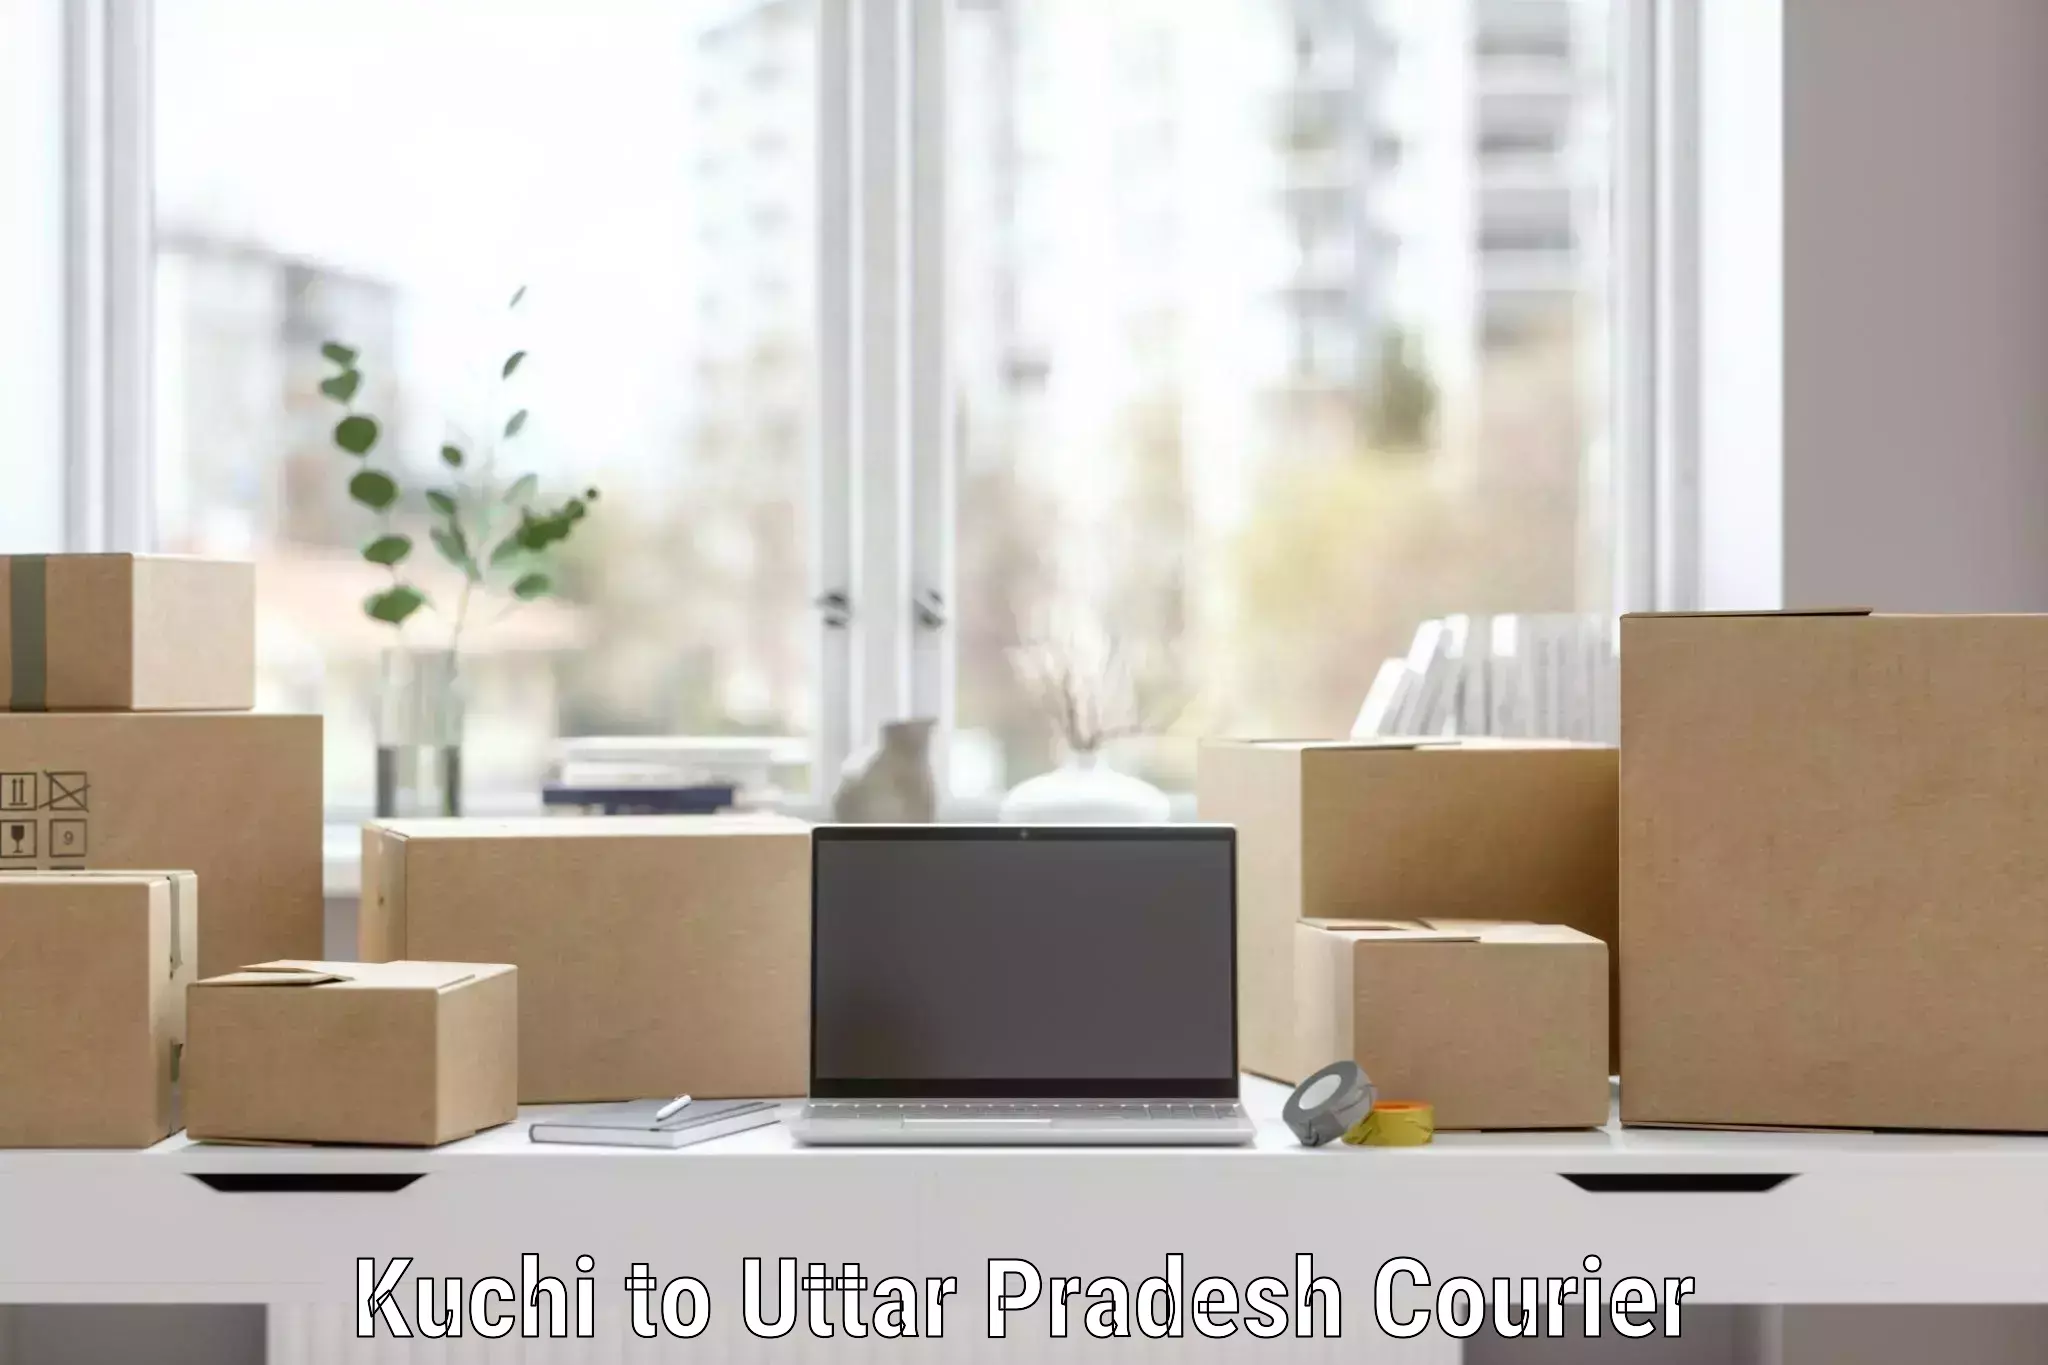 Efficient household moving Kuchi to Lucknow